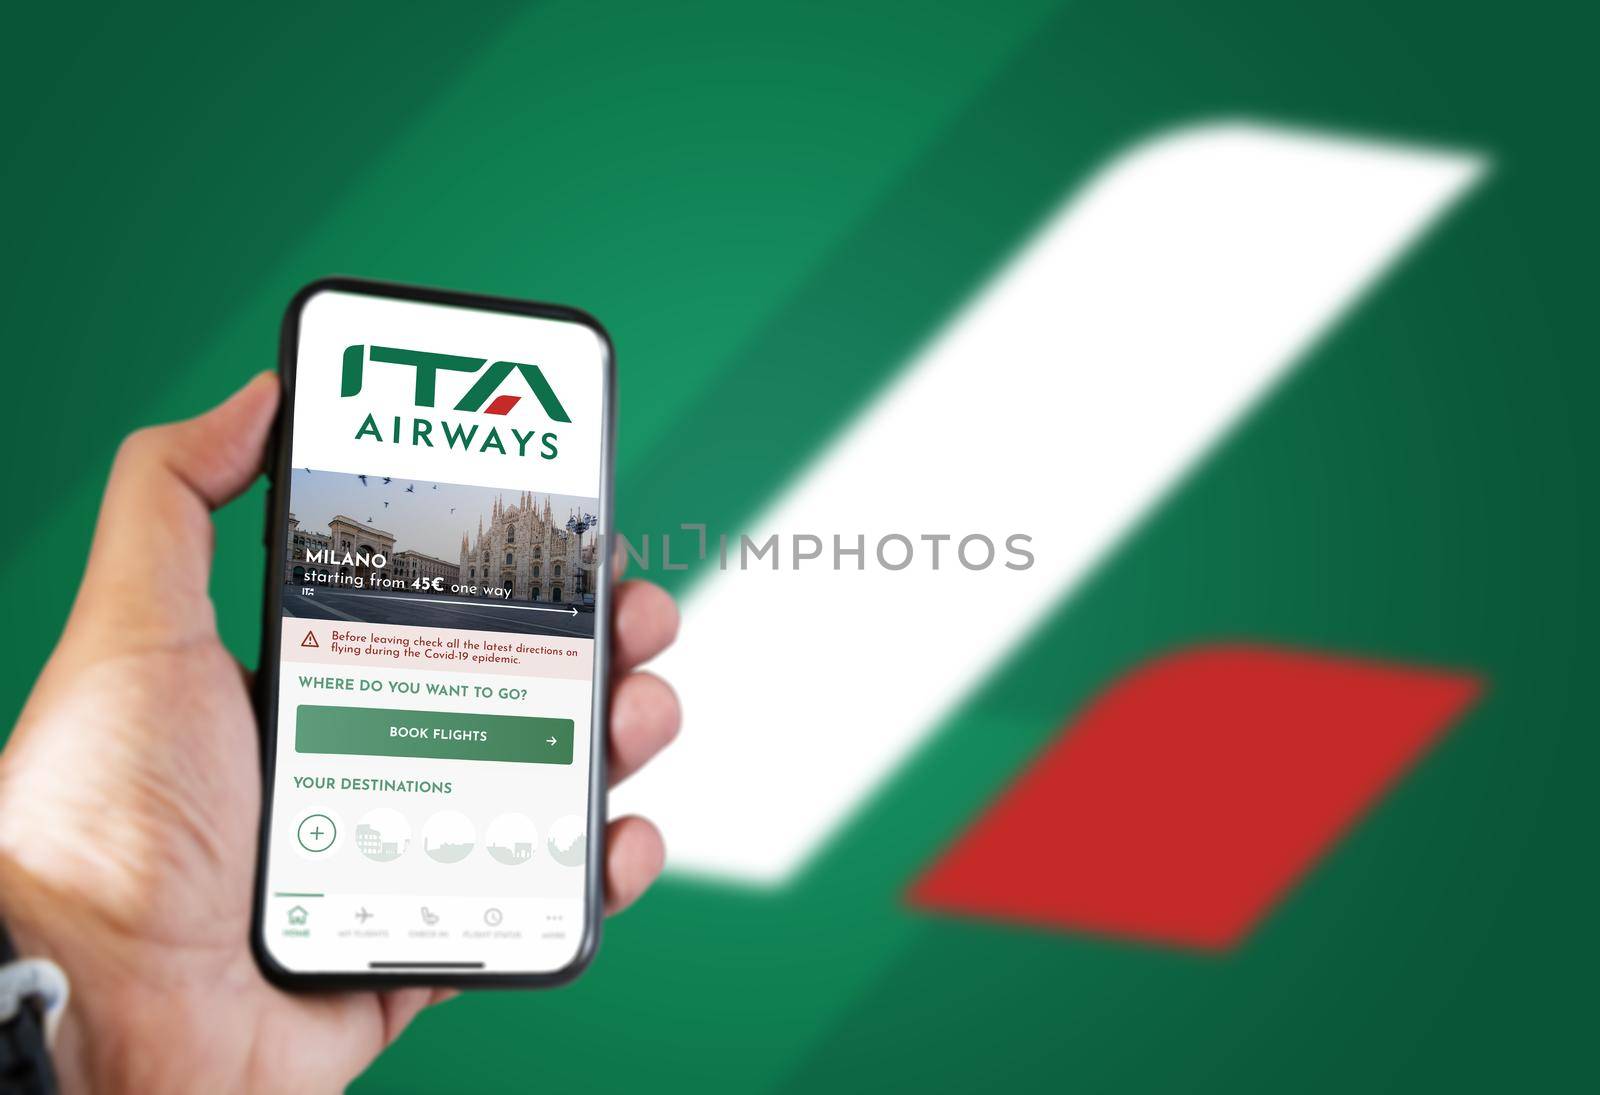 Rome, IT, October 2021: hand holding a phone with the ITA Airways app on the screen and the logo blurred on a green background.ITA Airways is the new Italian flag carrier starting from 15 October 2021